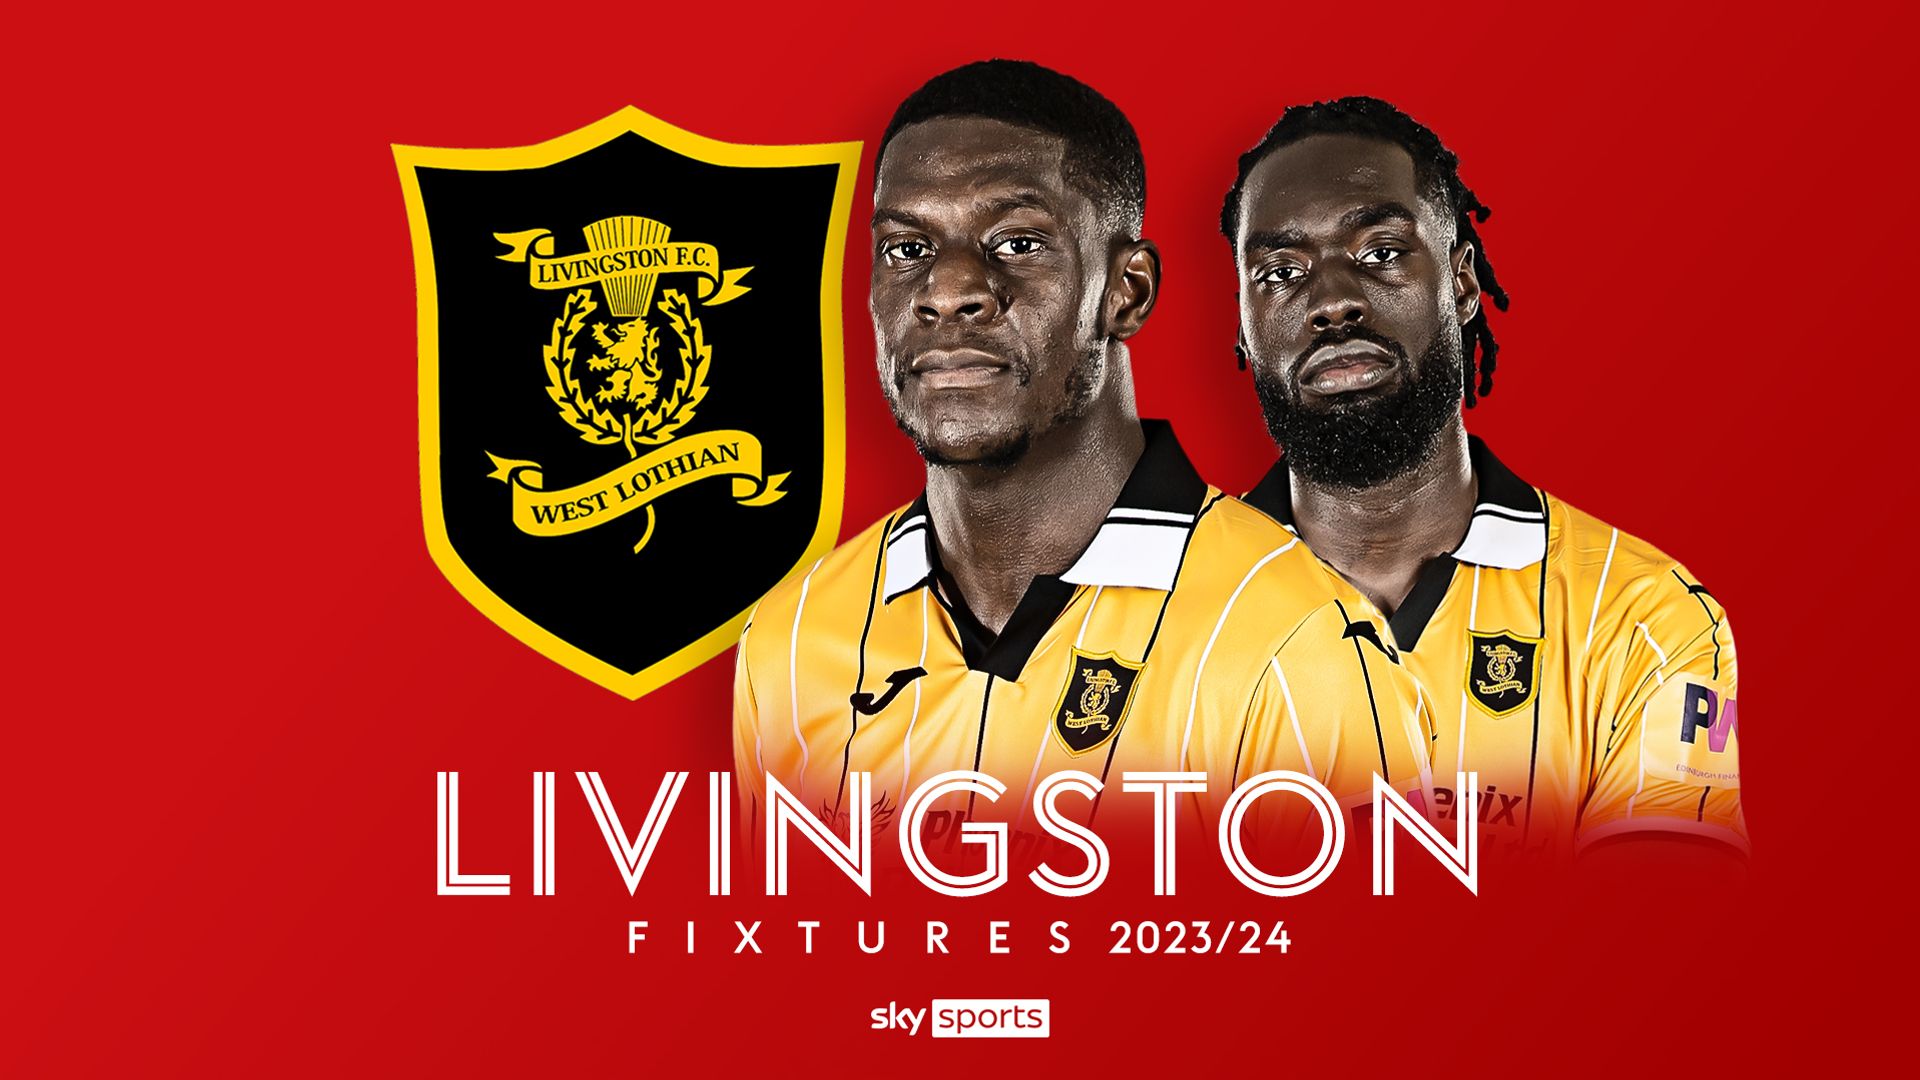 Livingston fixtures: Aberdeen first visitors on opening weekend